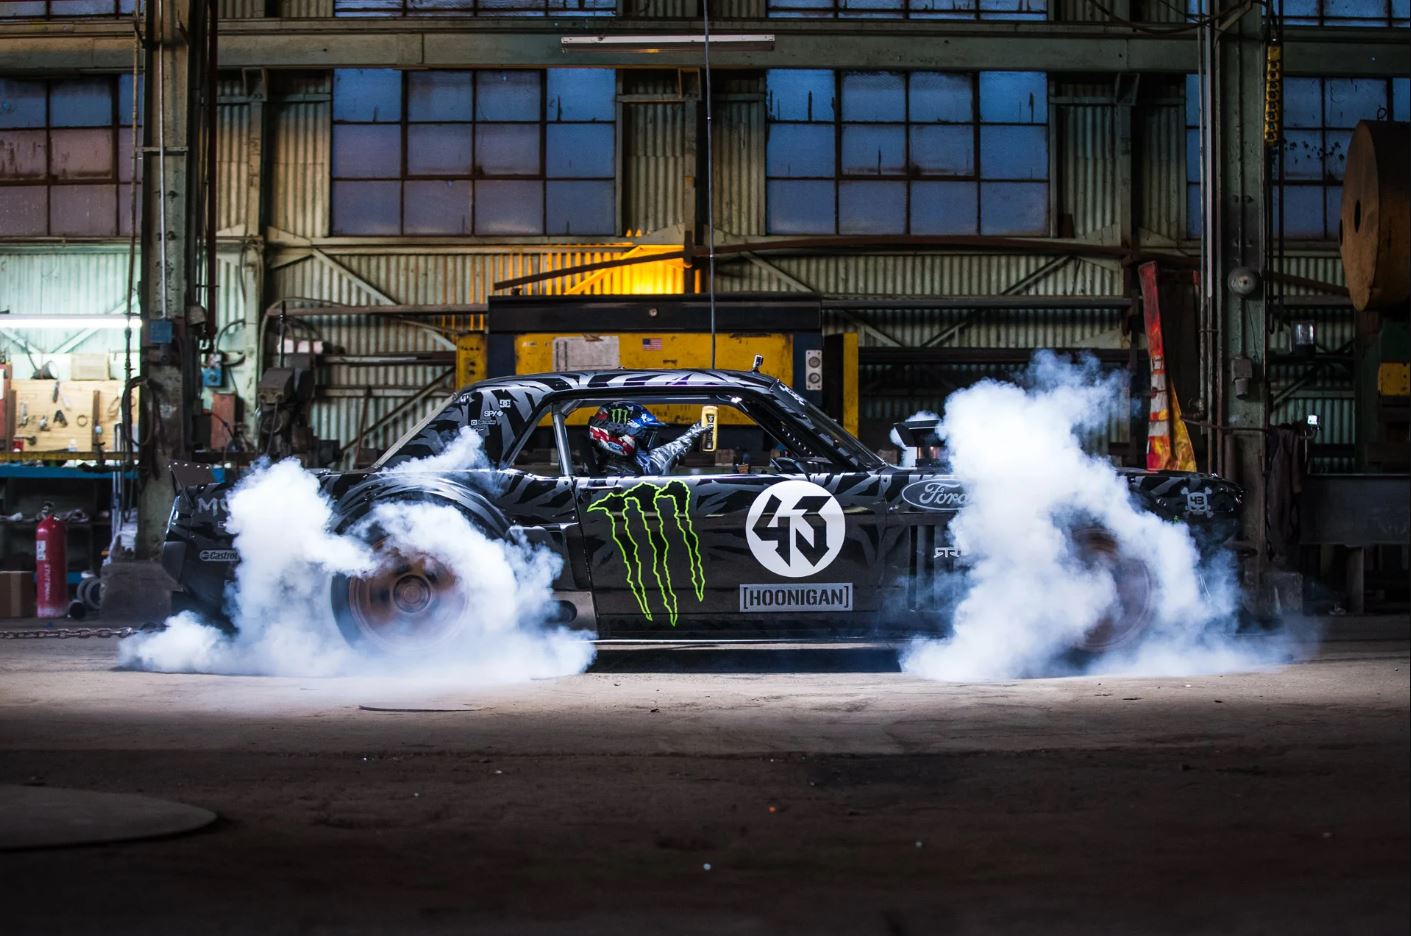 Ken Block's Gymkhana 10 is 20 minutes of nonstop awesome - CNET